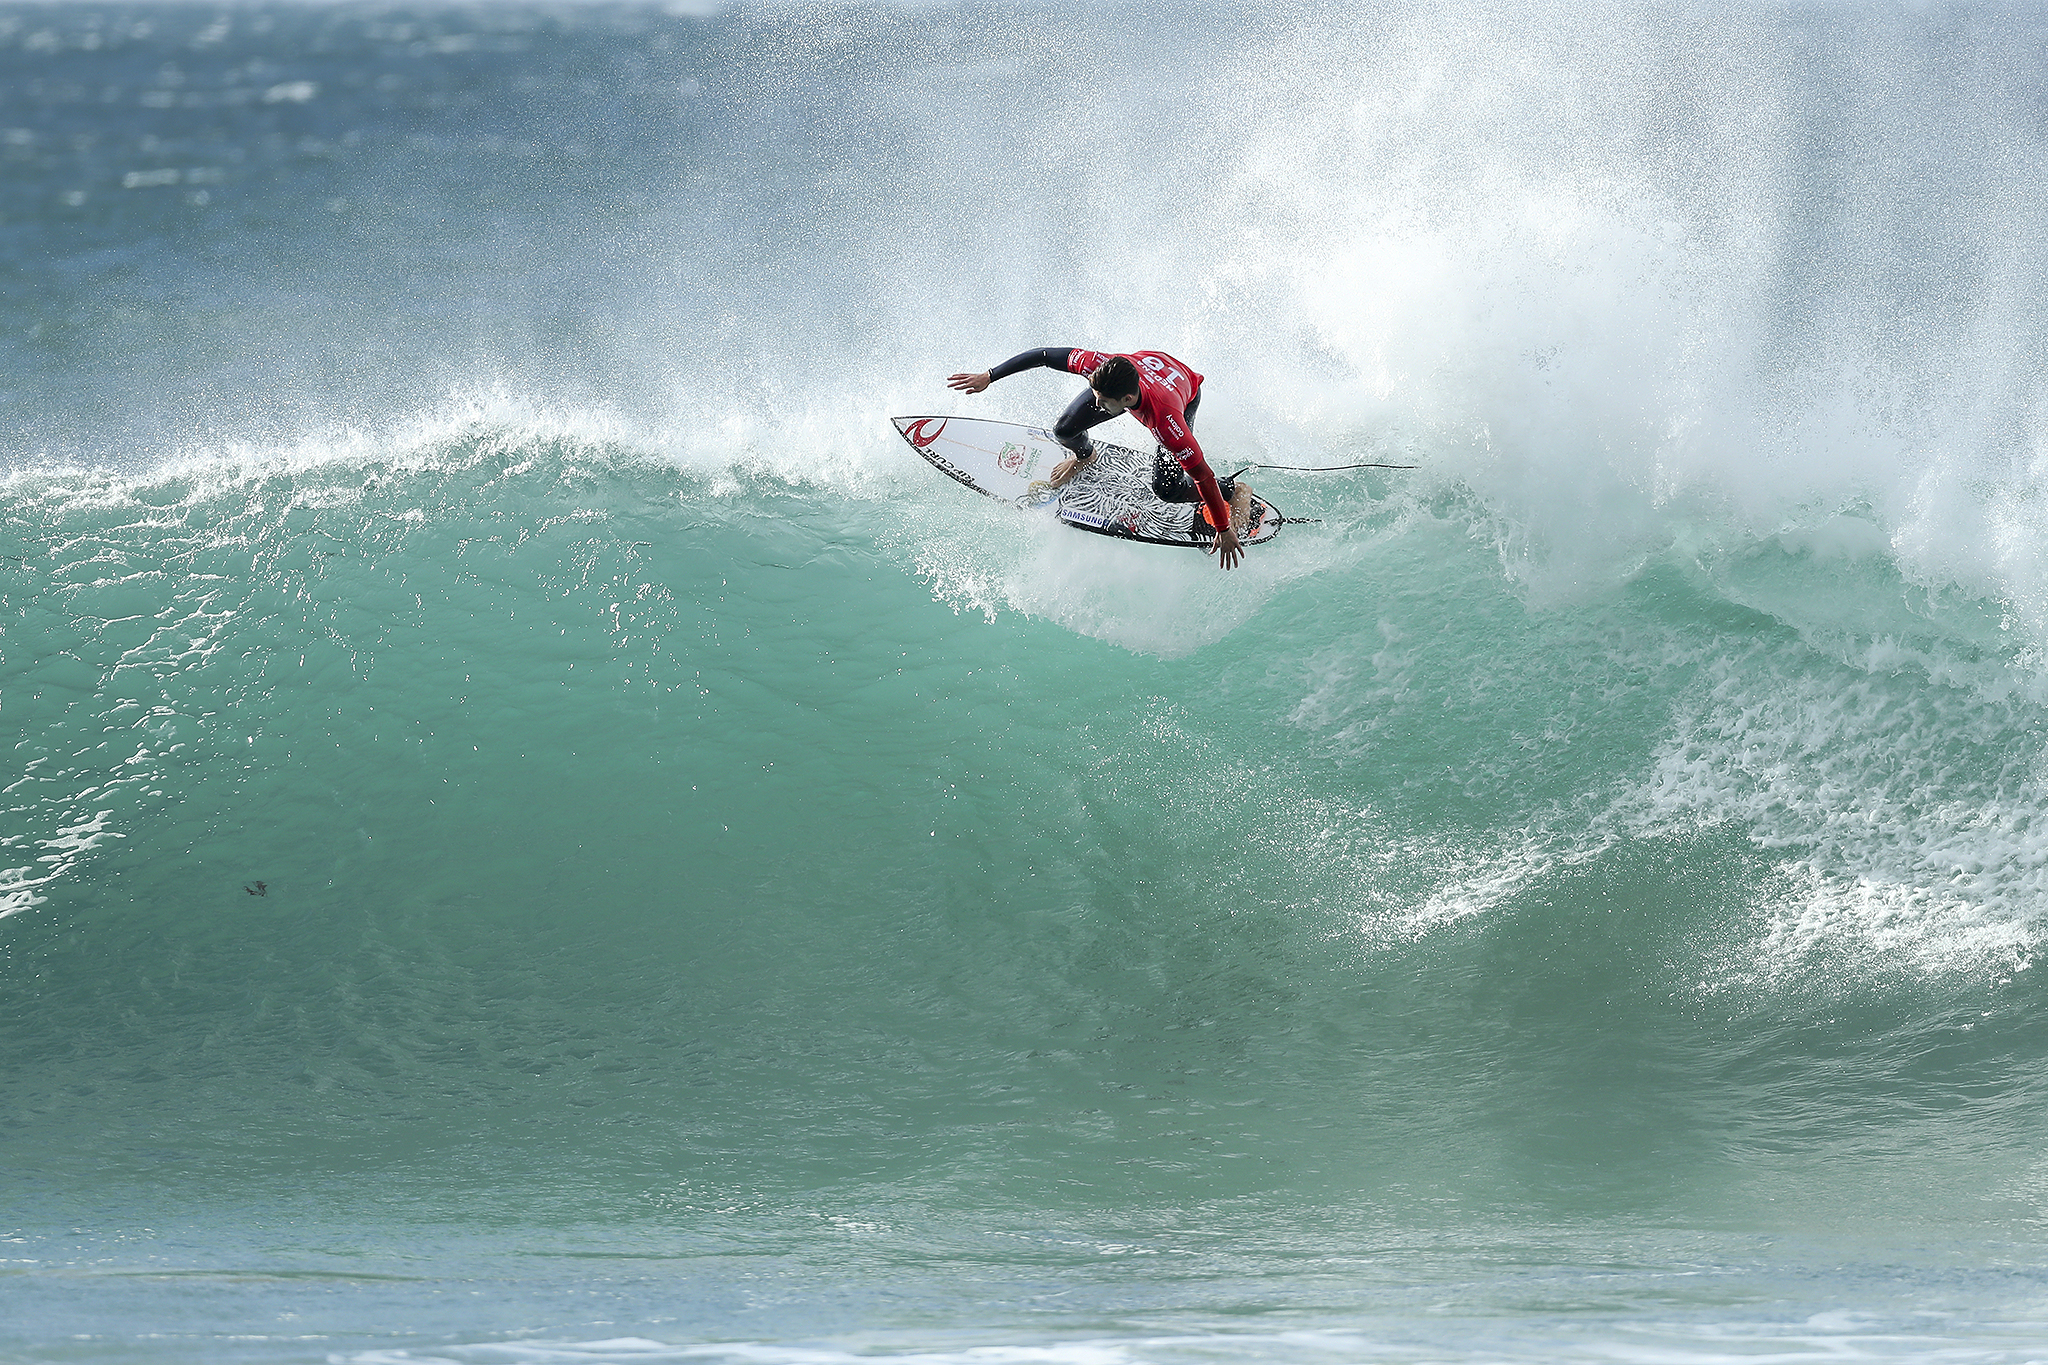 Gabriel Medina of Brasil (pictured) winning his Round One heat at the JBay Open on Wednesday July 6, 2016. PHOTO: © WSL/ Cestari SOCIAL: @kc80 @wsl This image is provided by the Association of Surfing Professionals LLC ("World Surf League") royalty-free for editorial use only. No commercial rights are granted to the Images in any way. The Images are provided on an "as is" basis and no warranty is provided for use of a particular purpose. Rights to individuals within the Images are not provided. The copyright is owned by World Surf League. Sale or license of the Images is prohibited. ALL RIGHTS RESERVED.